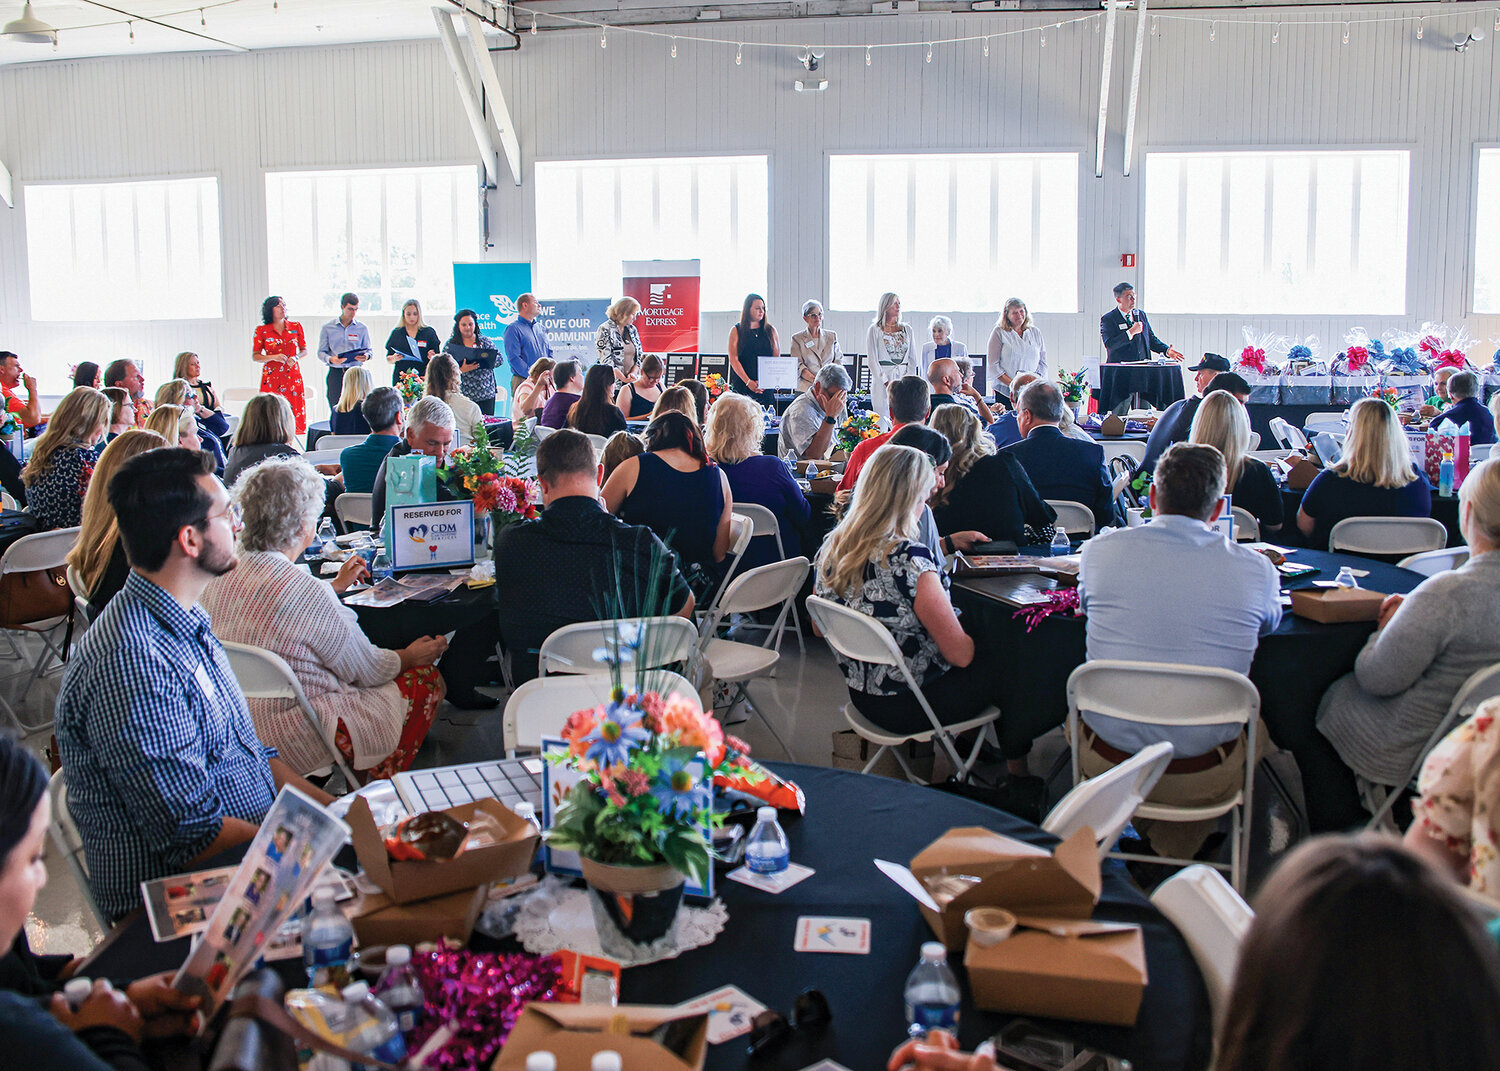 The reception line for awards is pictured during the seventh annual Senior Heroes Awards ceremony at the Pearson Air Museum in Vancouver on Wednesday, July 12.